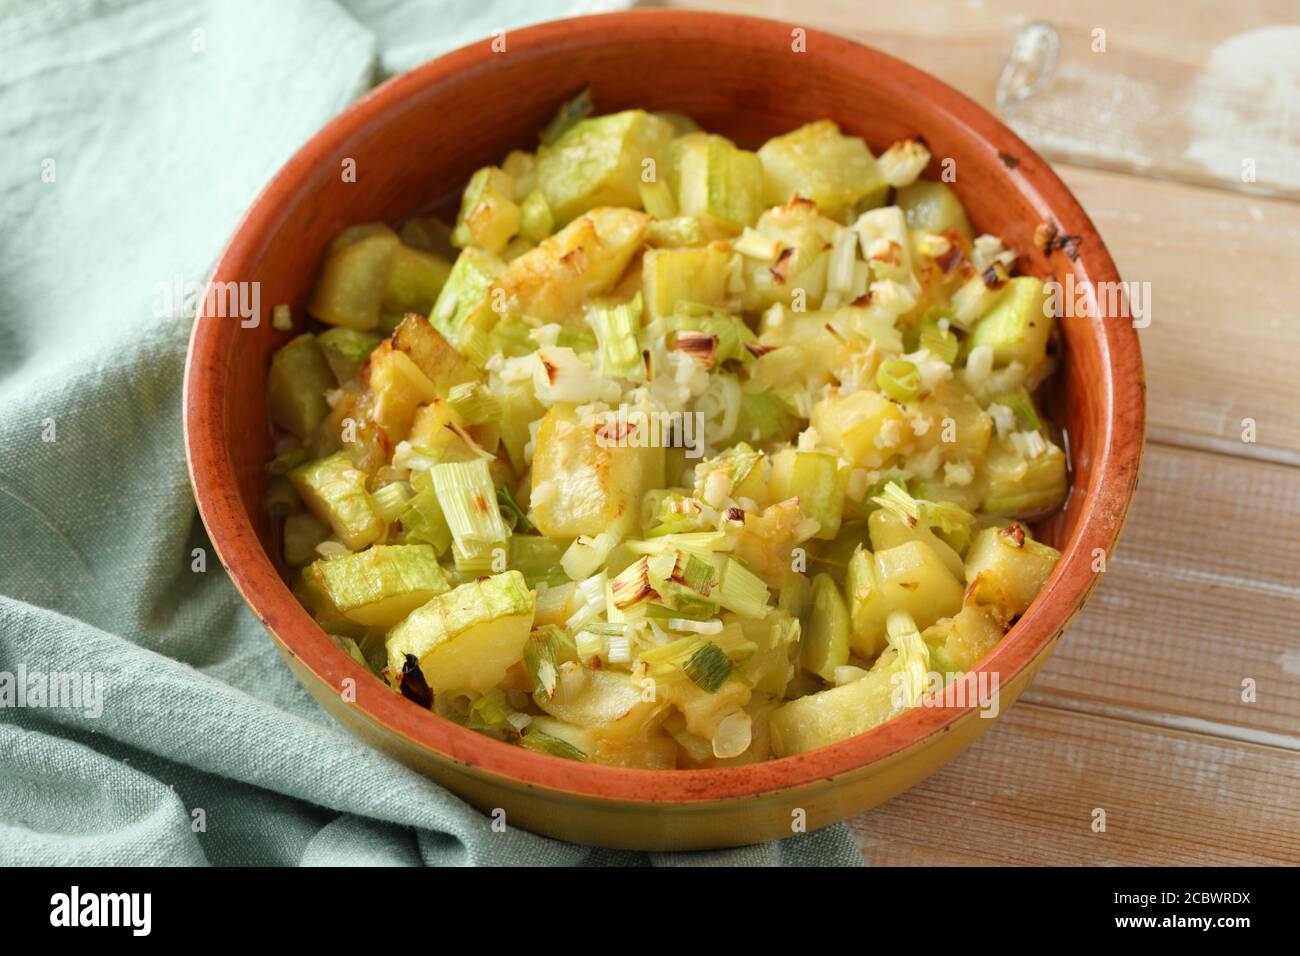 Summer squash and green onion gratin in a baking dish on a rustic table Stock Photo